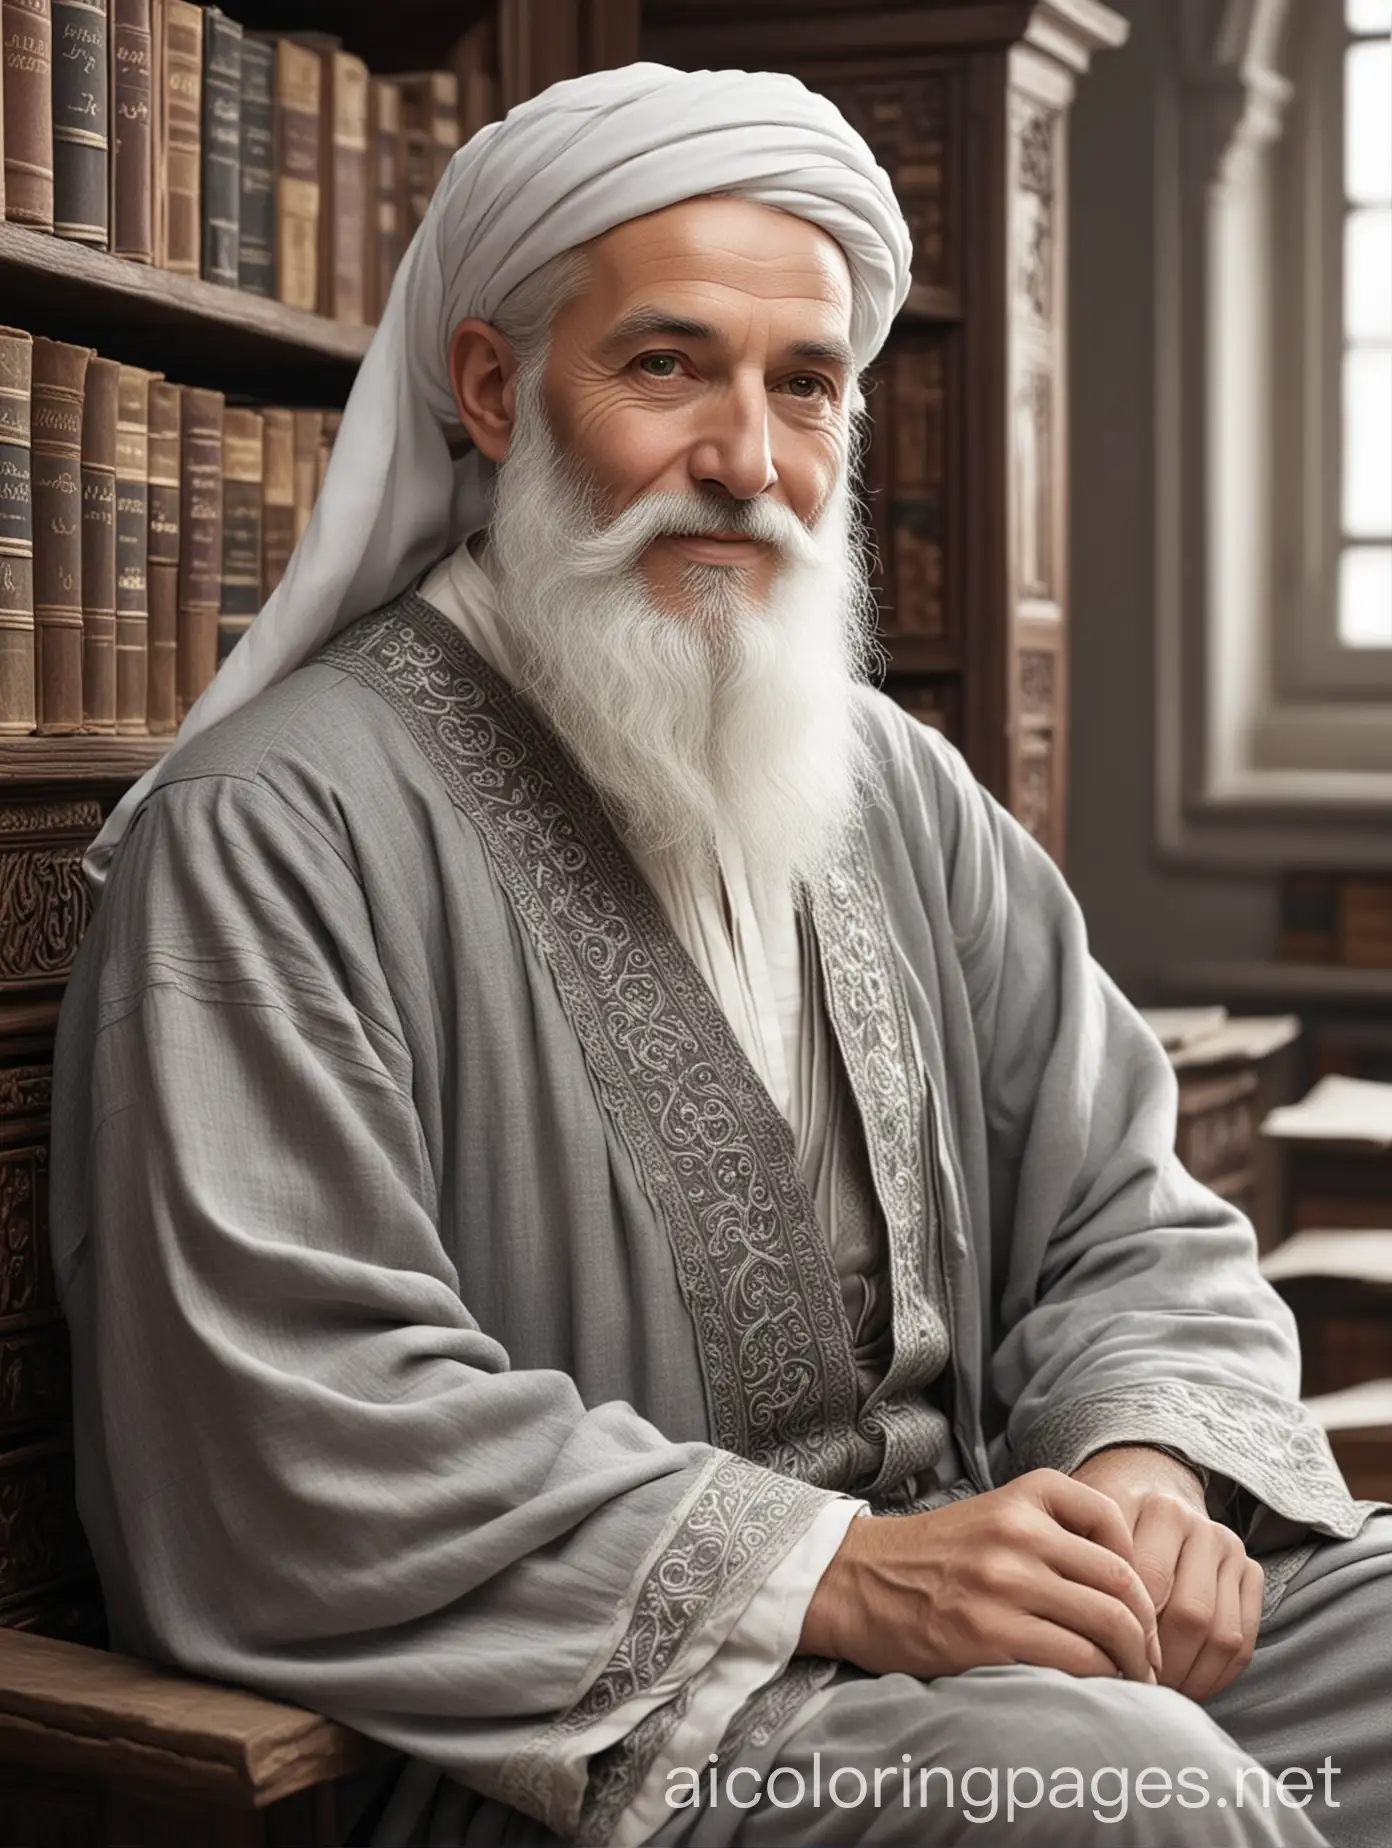 MiddleAged-Islamic-Scholar-in-Vintage-Gray-Attire-Smiling-in-Library-Portrait